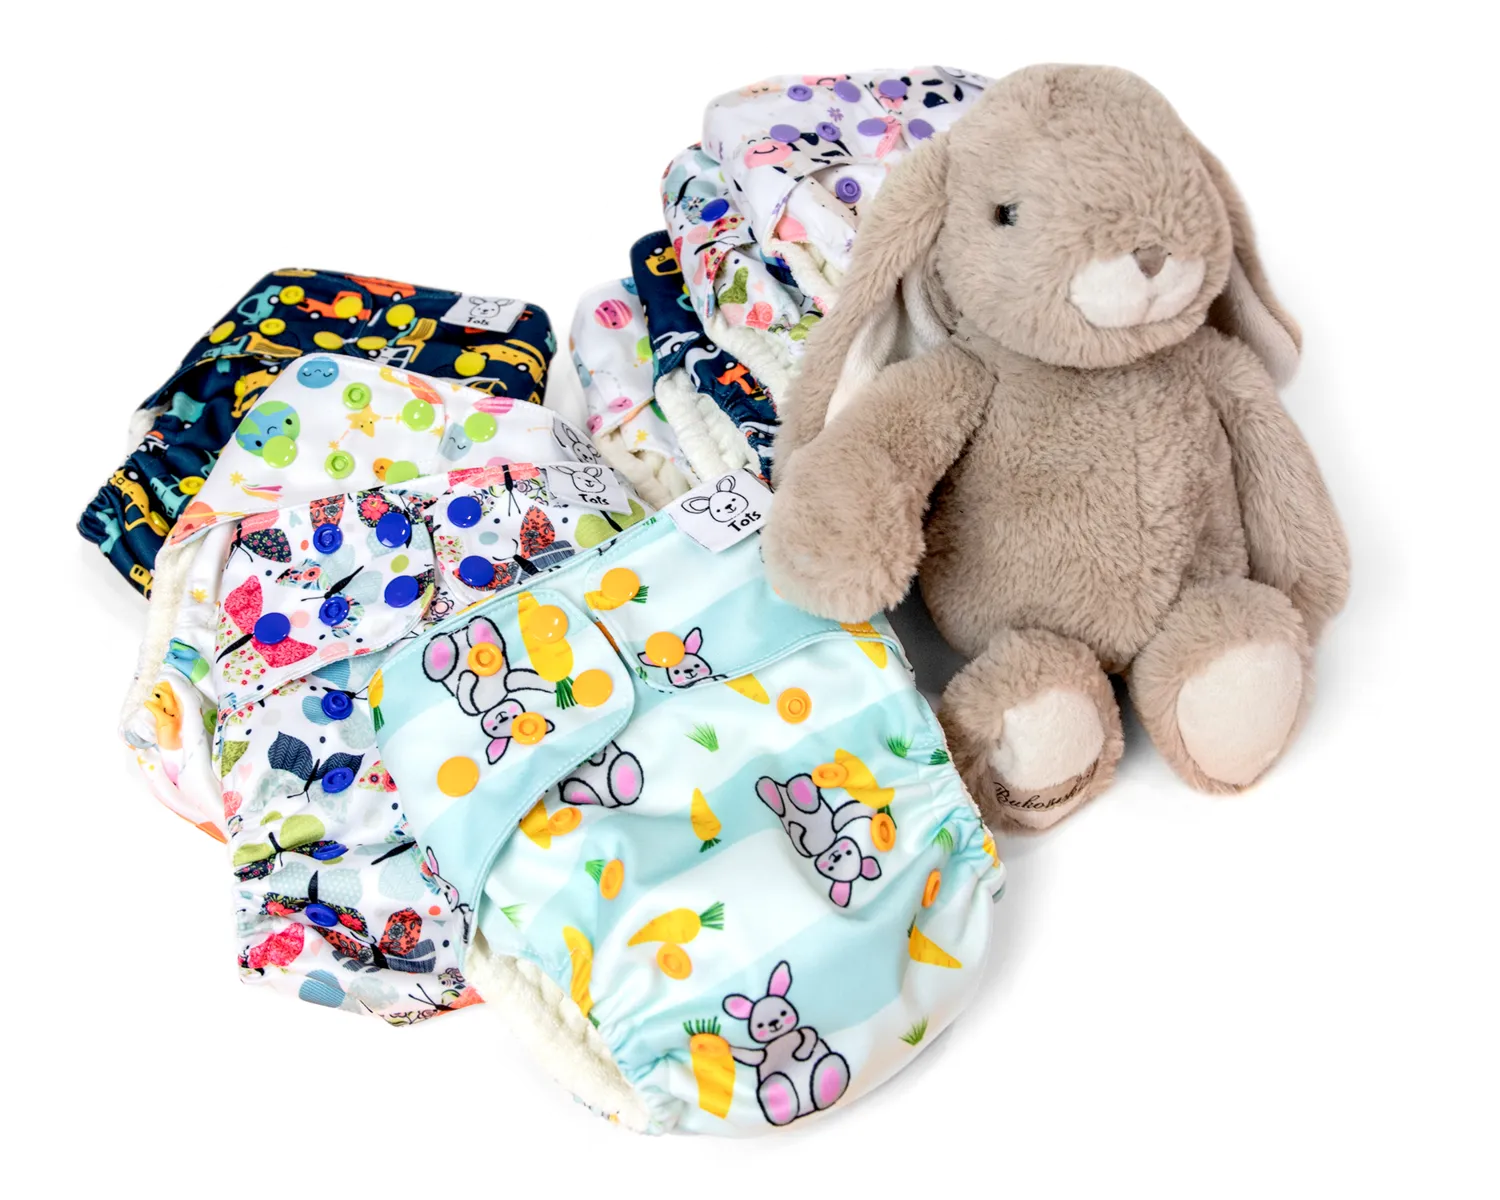 Tots baby products - cloth diapers and accessories